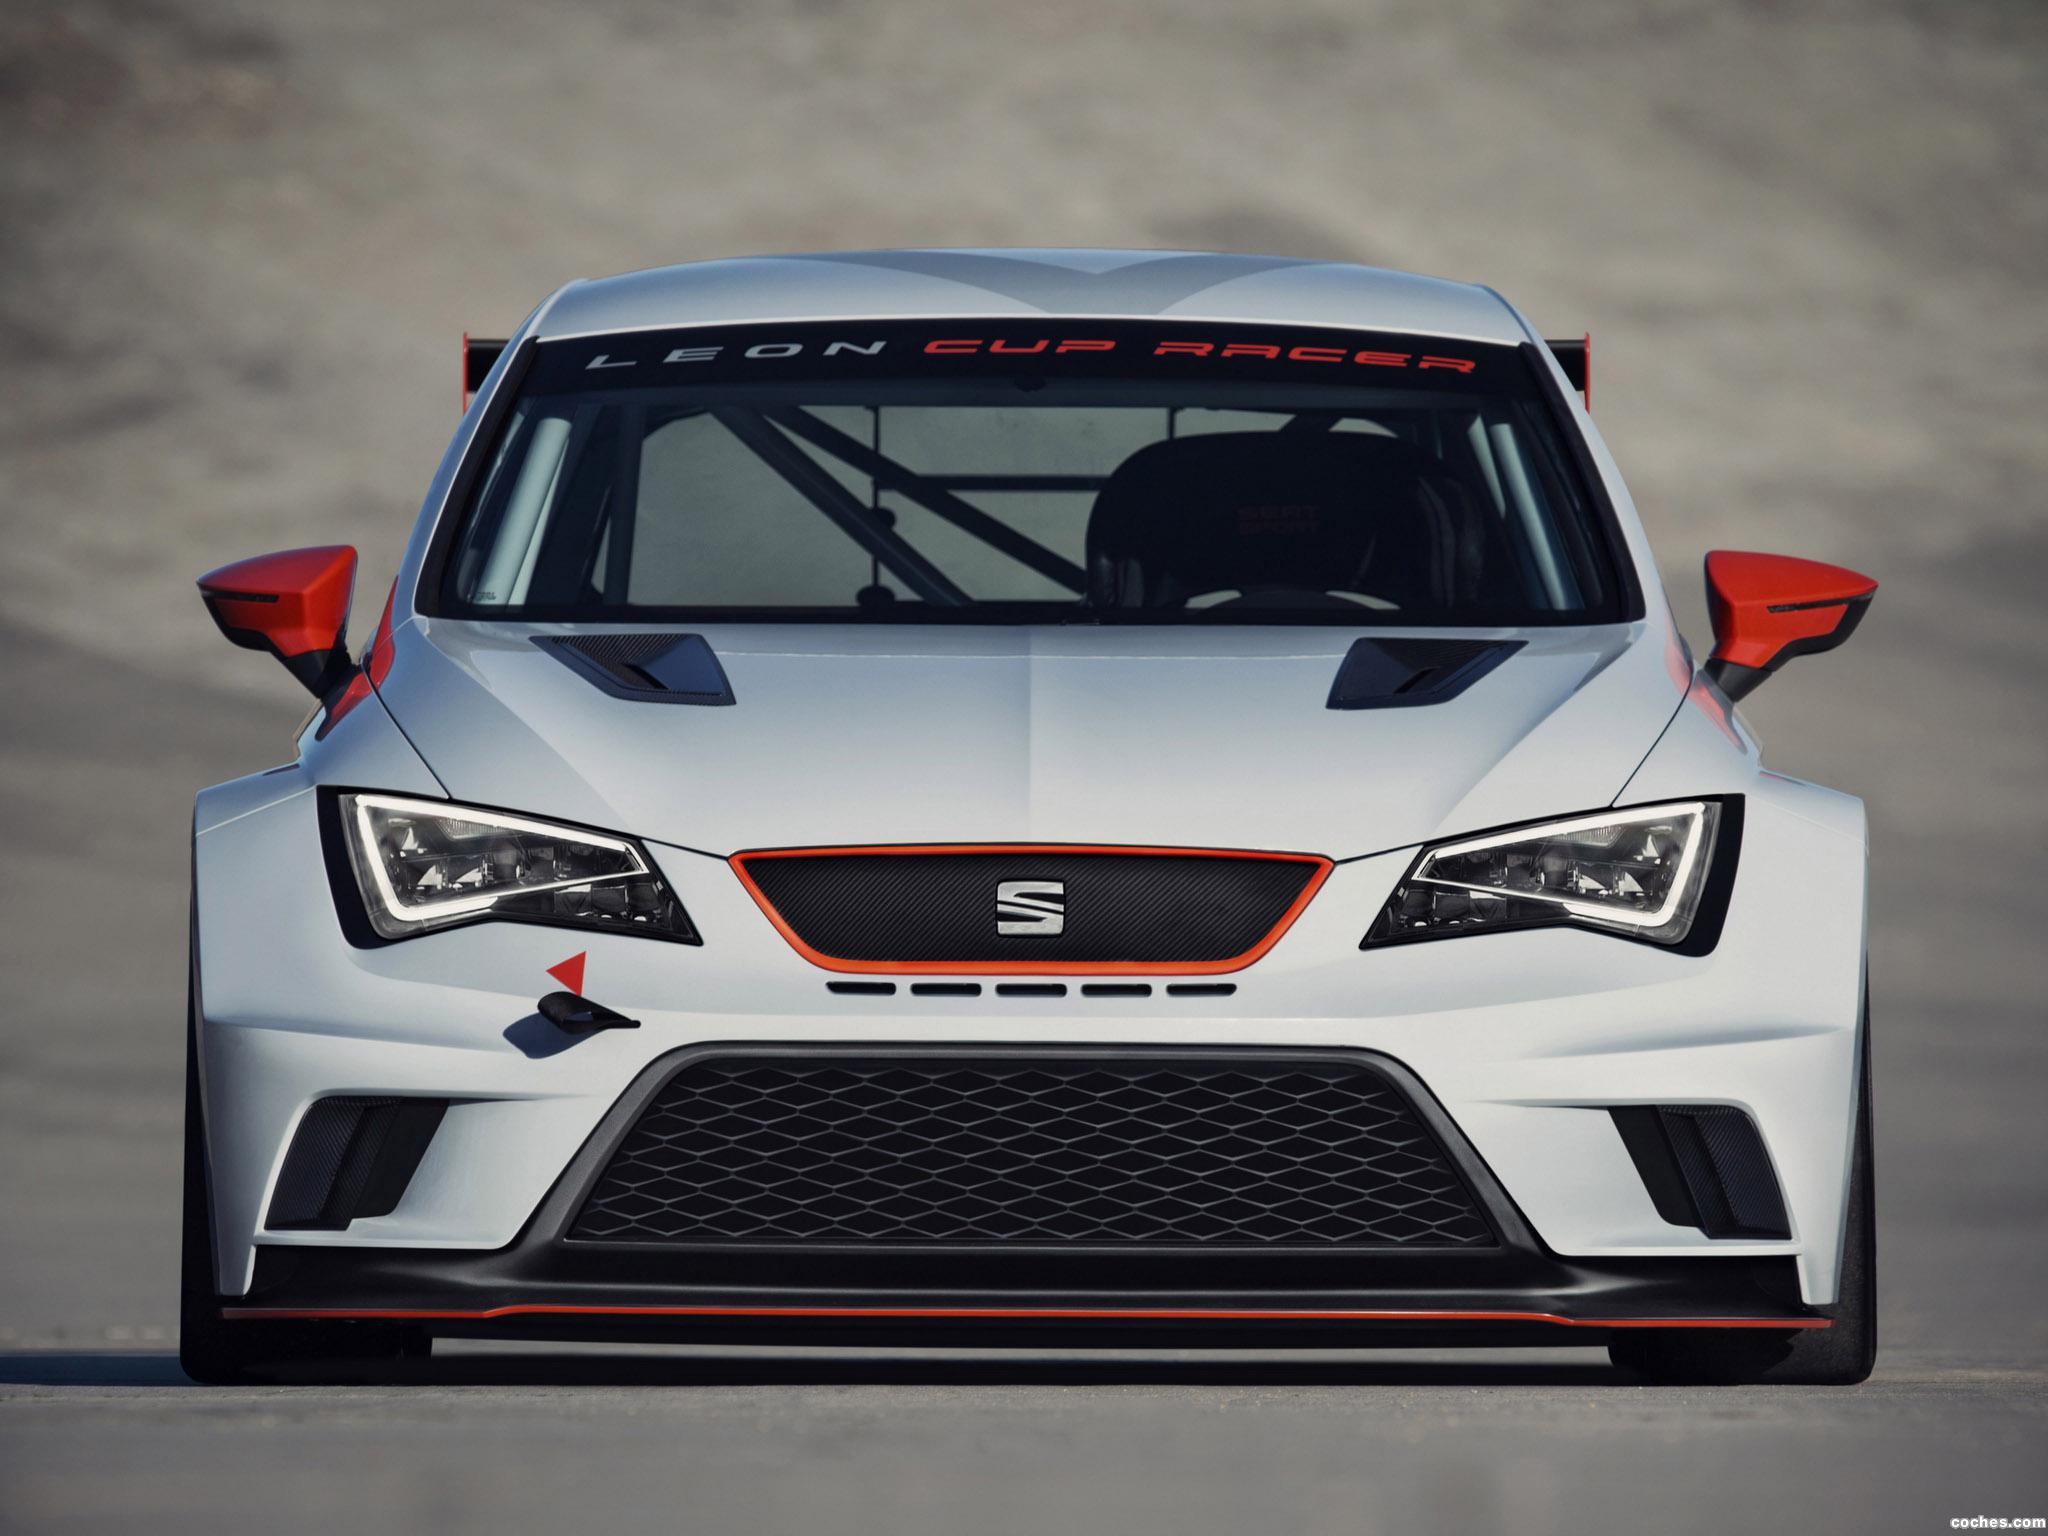 seat_leon-cup-racer-2013_r20